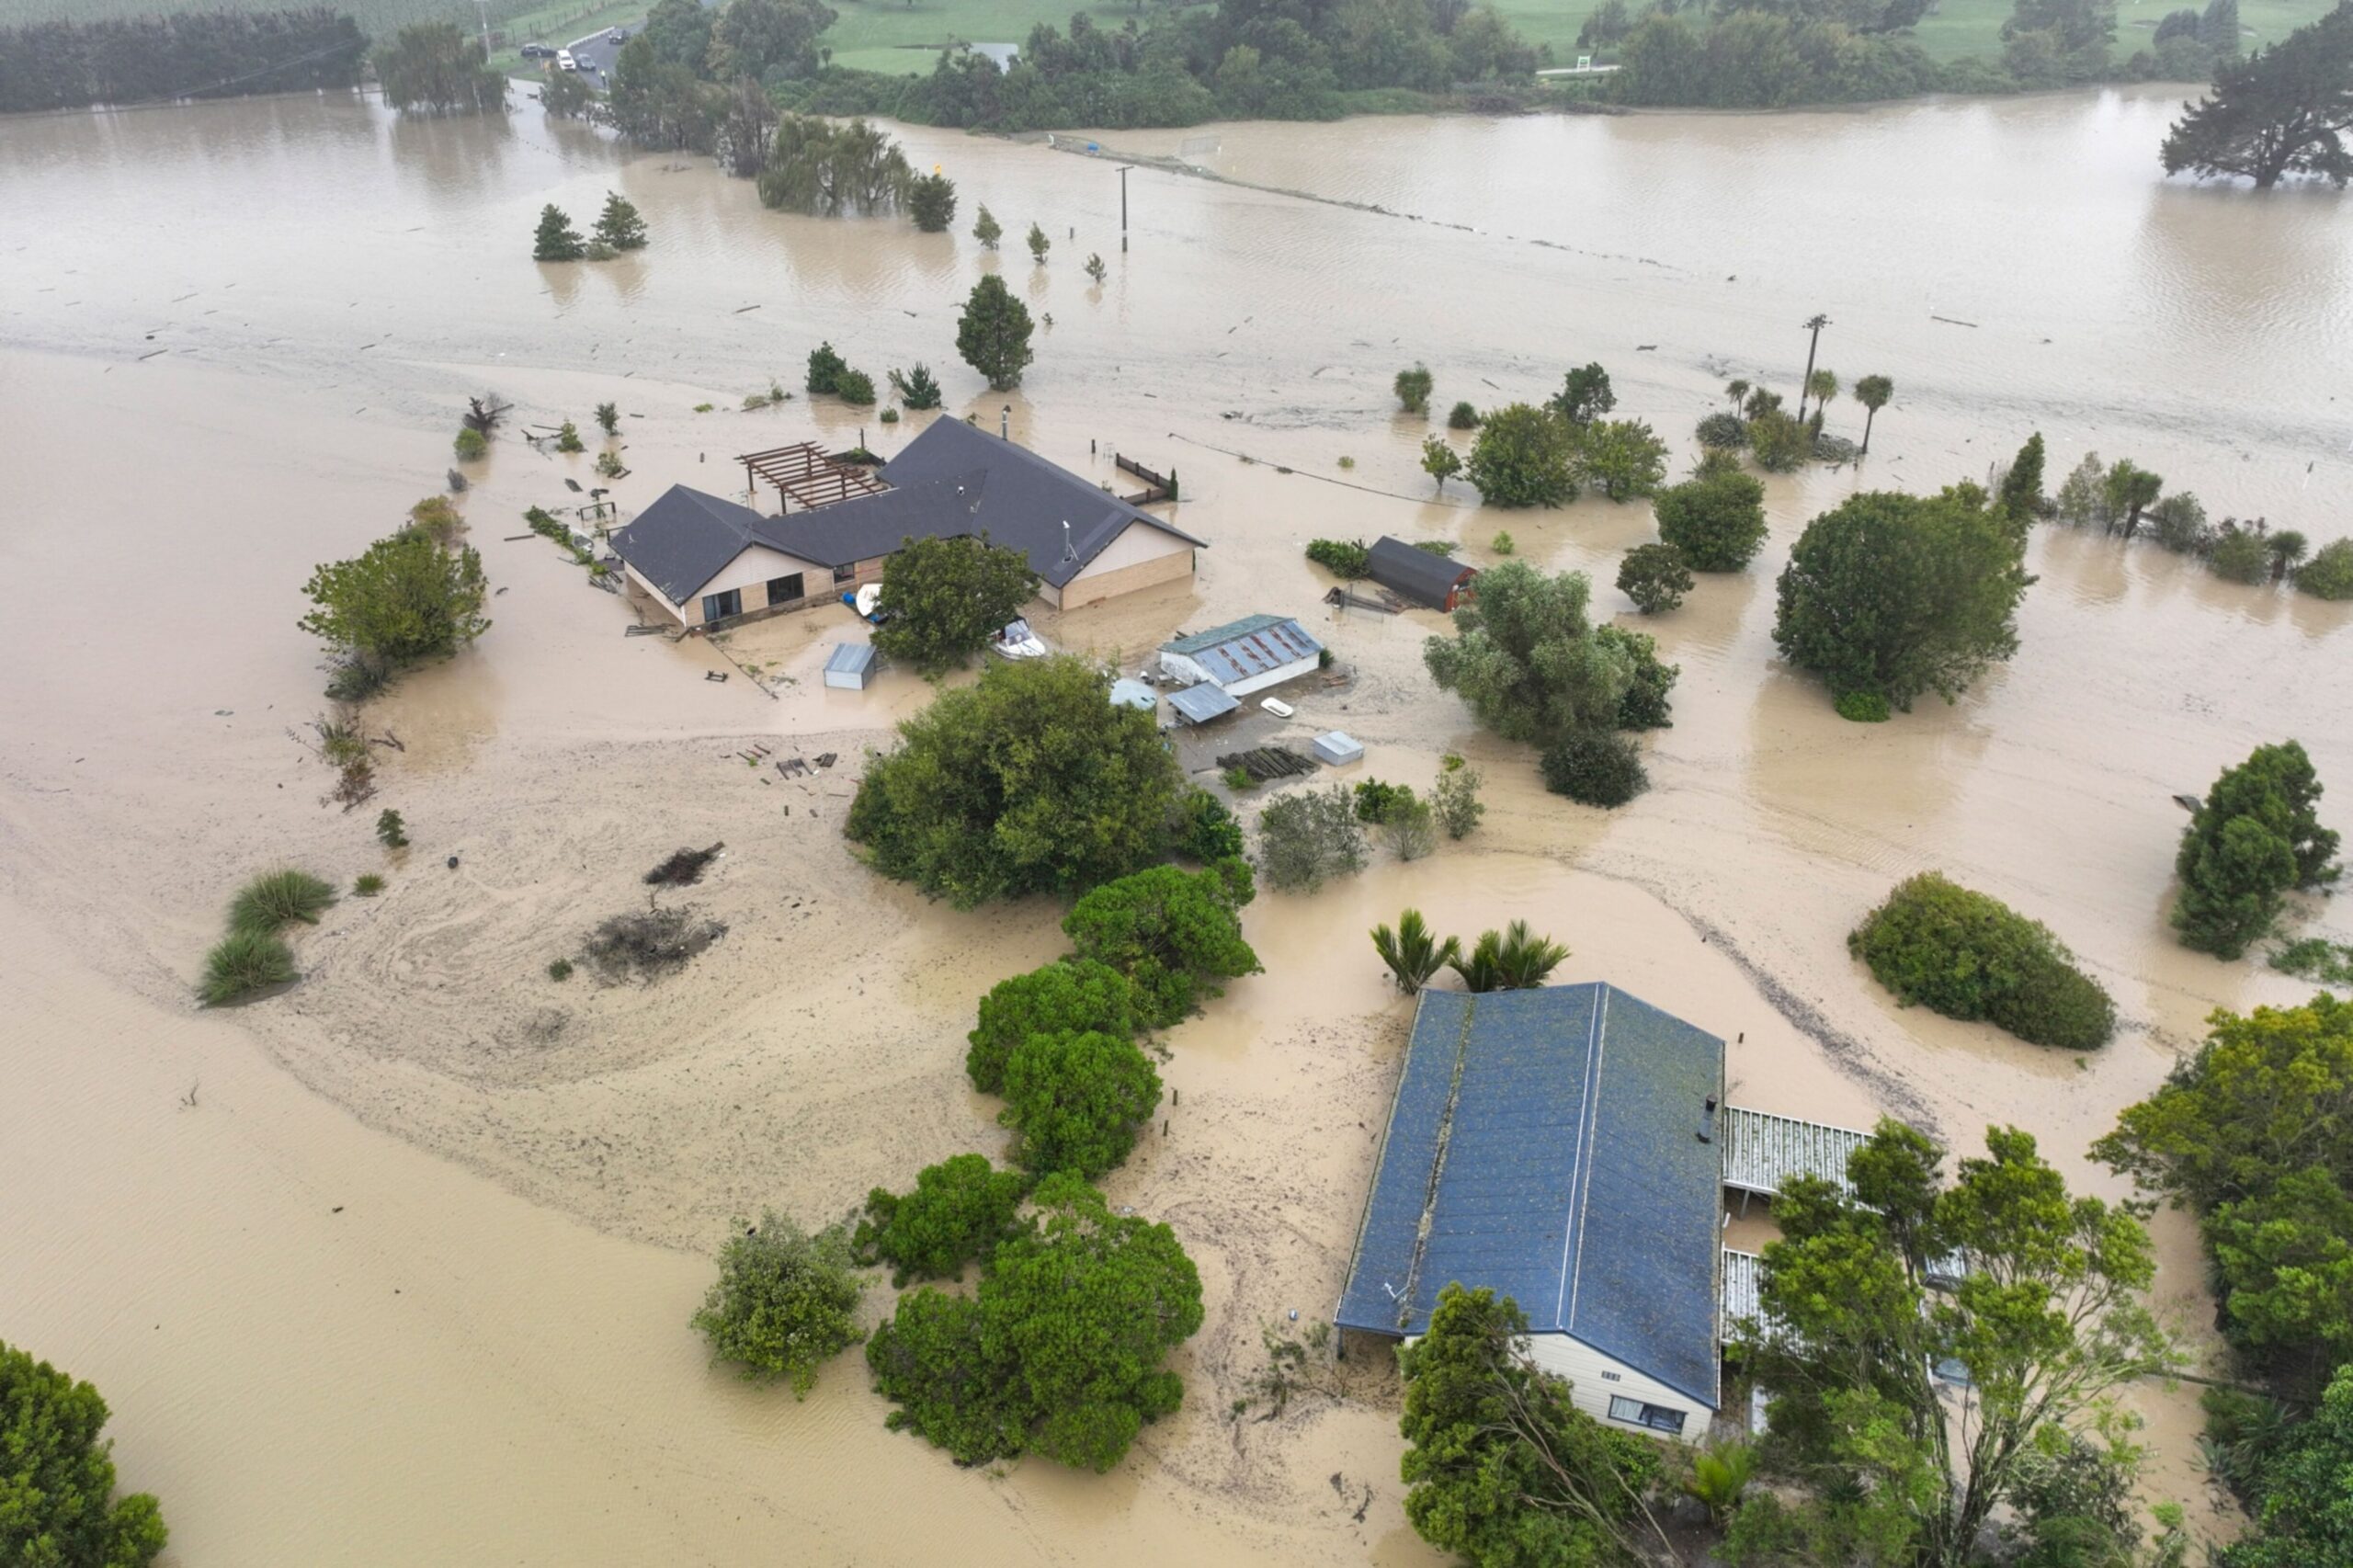 New Zealand Offers to Buy Out Owners of Cyclone, Flood-Damaged Homes